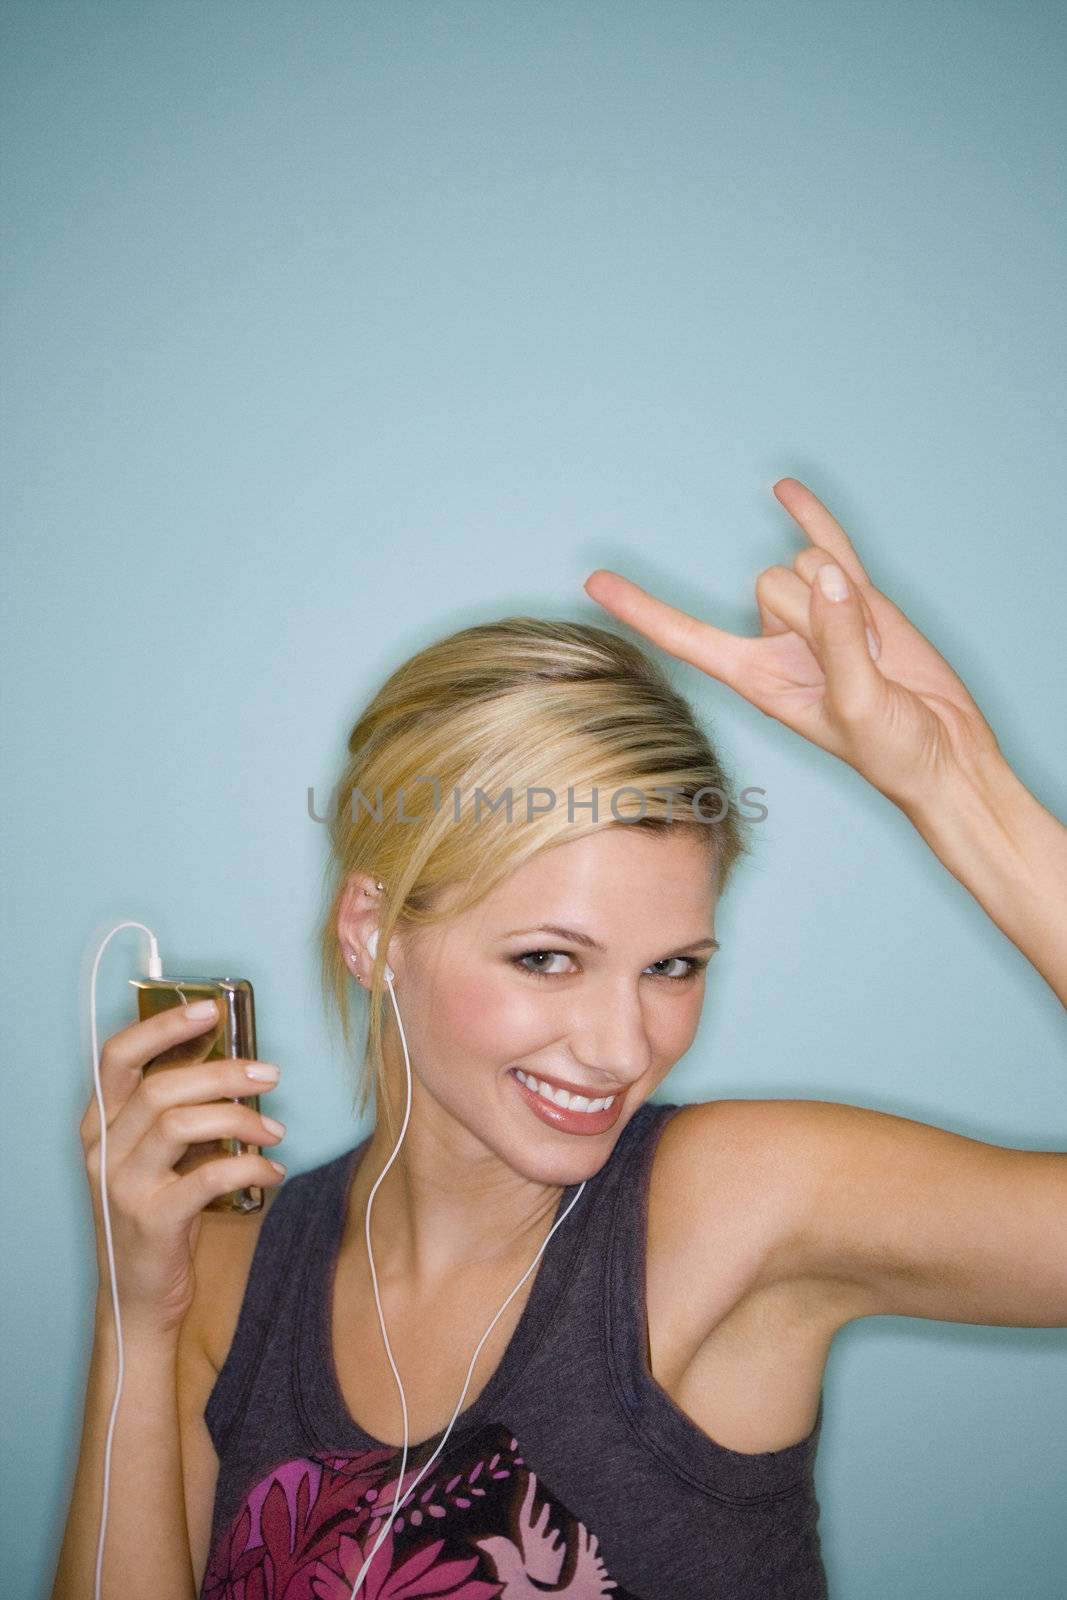 Smiling pretty woman with earbuds listening to MP3 player